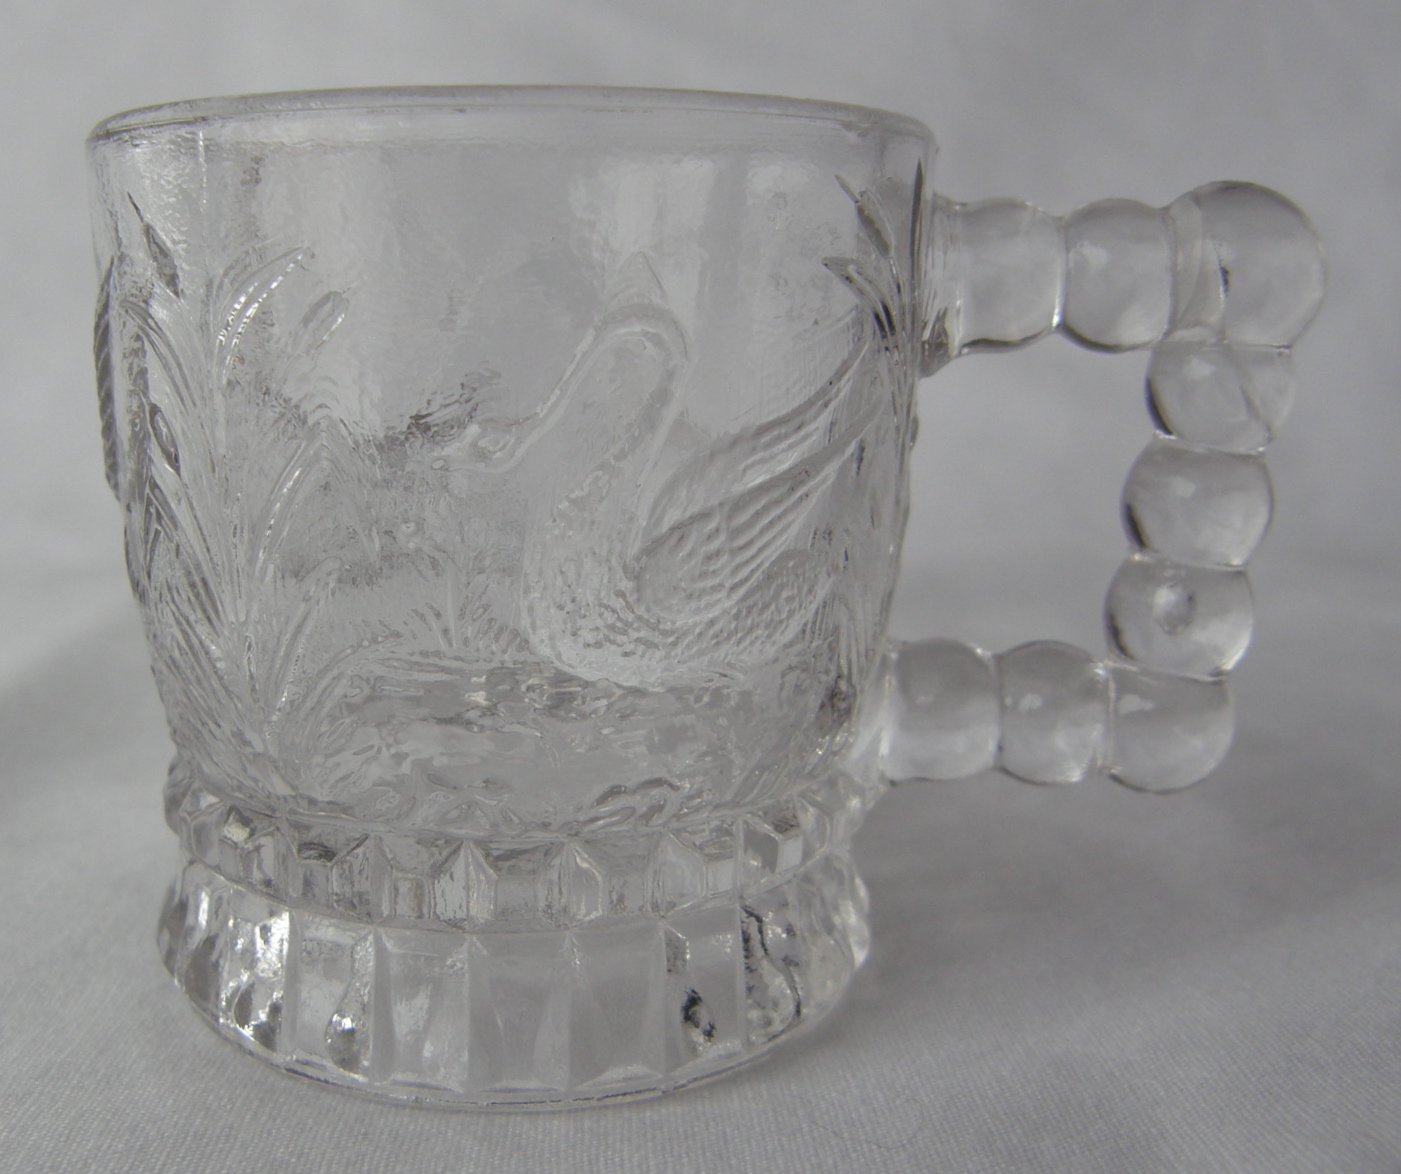 Swan - aka Water Fowl, U.S. Glass No. 3802, or Federal's No. 3802 (Size: 1-7/8" dia. x 2" ht.; Color: Clear) To the left of the handle, sculpting shows a swimming swan among water grasses.